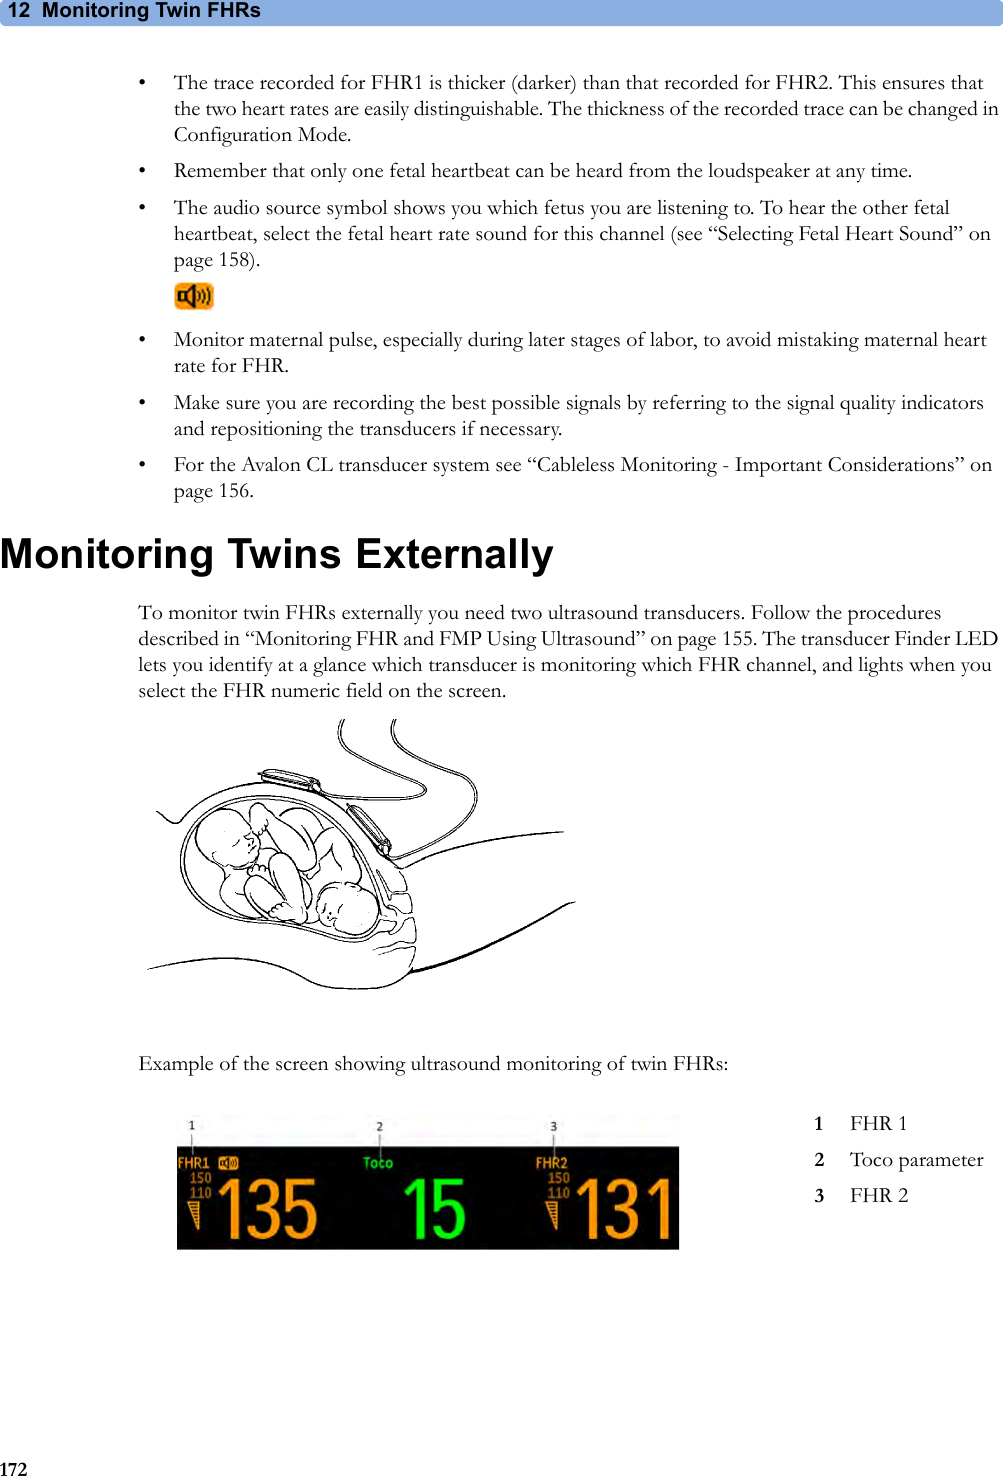 12 Monitoring Twin FHRs172• The trace recorded for FHR1 is thicker (darker) than that recorded for FHR2. This ensures that the two heart rates are easily distinguishable. The thickness of the recorded trace can be changed in Configuration Mode.• Remember that only one fetal heartbeat can be heard from the loudspeaker at any time.• The audio source symbol shows you which fetus you are listening to. To hear the other fetal heartbeat, select the fetal heart rate sound for this channel (see “Selecting Fetal Heart Sound” on page 158).• Monitor maternal pulse, especially during later stages of labor, to avoid mistaking maternal heart rate for FHR.• Make sure you are recording the best possible signals by referring to the signal quality indicators and repositioning the transducers if necessary.• For the Avalon CL transducer system see “Cableless Monitoring - Important Considerations” on page 156.Monitoring Twins ExternallyTo monitor twin FHRs externally you need two ultrasound transducers. Follow the procedures described in “Monitoring FHR and FMP Using Ultrasound” on page 155. The transducer Finder LED lets you identify at a glance which transducer is monitoring which FHR channel, and lights when you select the FHR numeric field on the screen.Example of the screen showing ultrasound monitoring of twin FHRs:1FHR 12Toco parameter3FHR 2